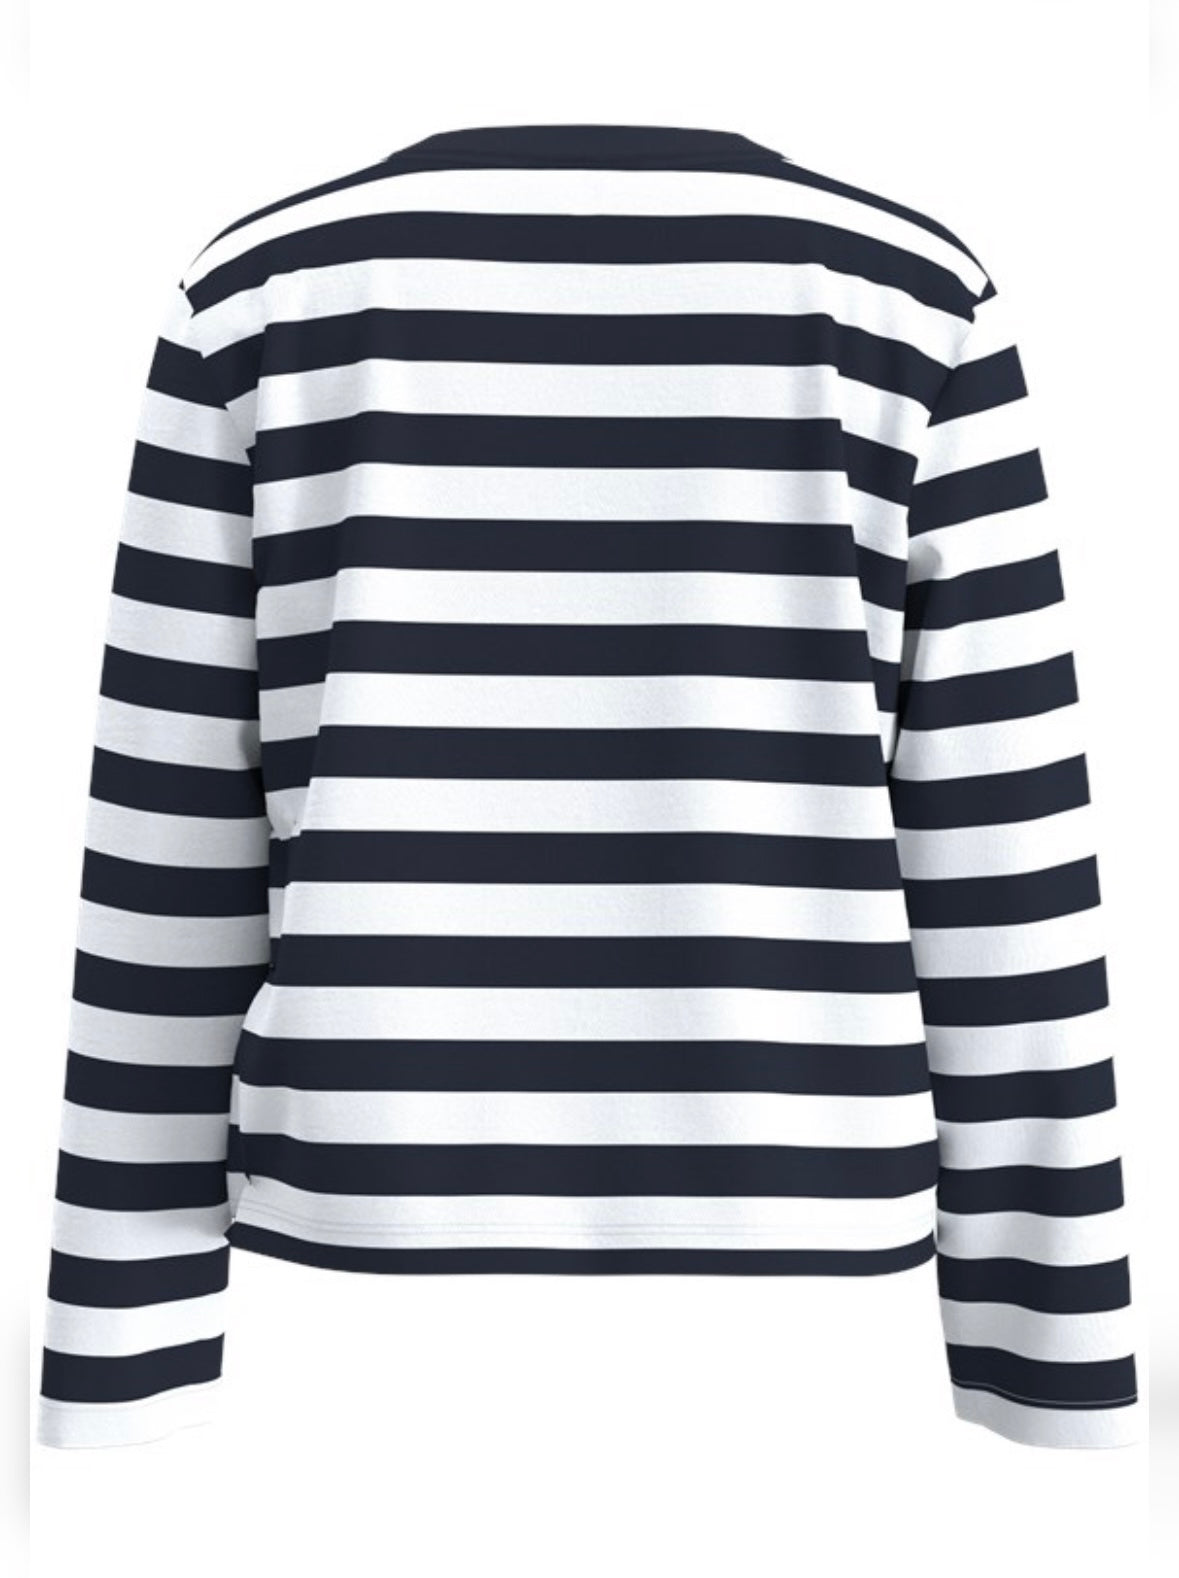 SELECTED FEMME - ESSENTIAL LS STRIPED BOXY TEE - DARK SAPPHIRE/BRIGHT WHITE